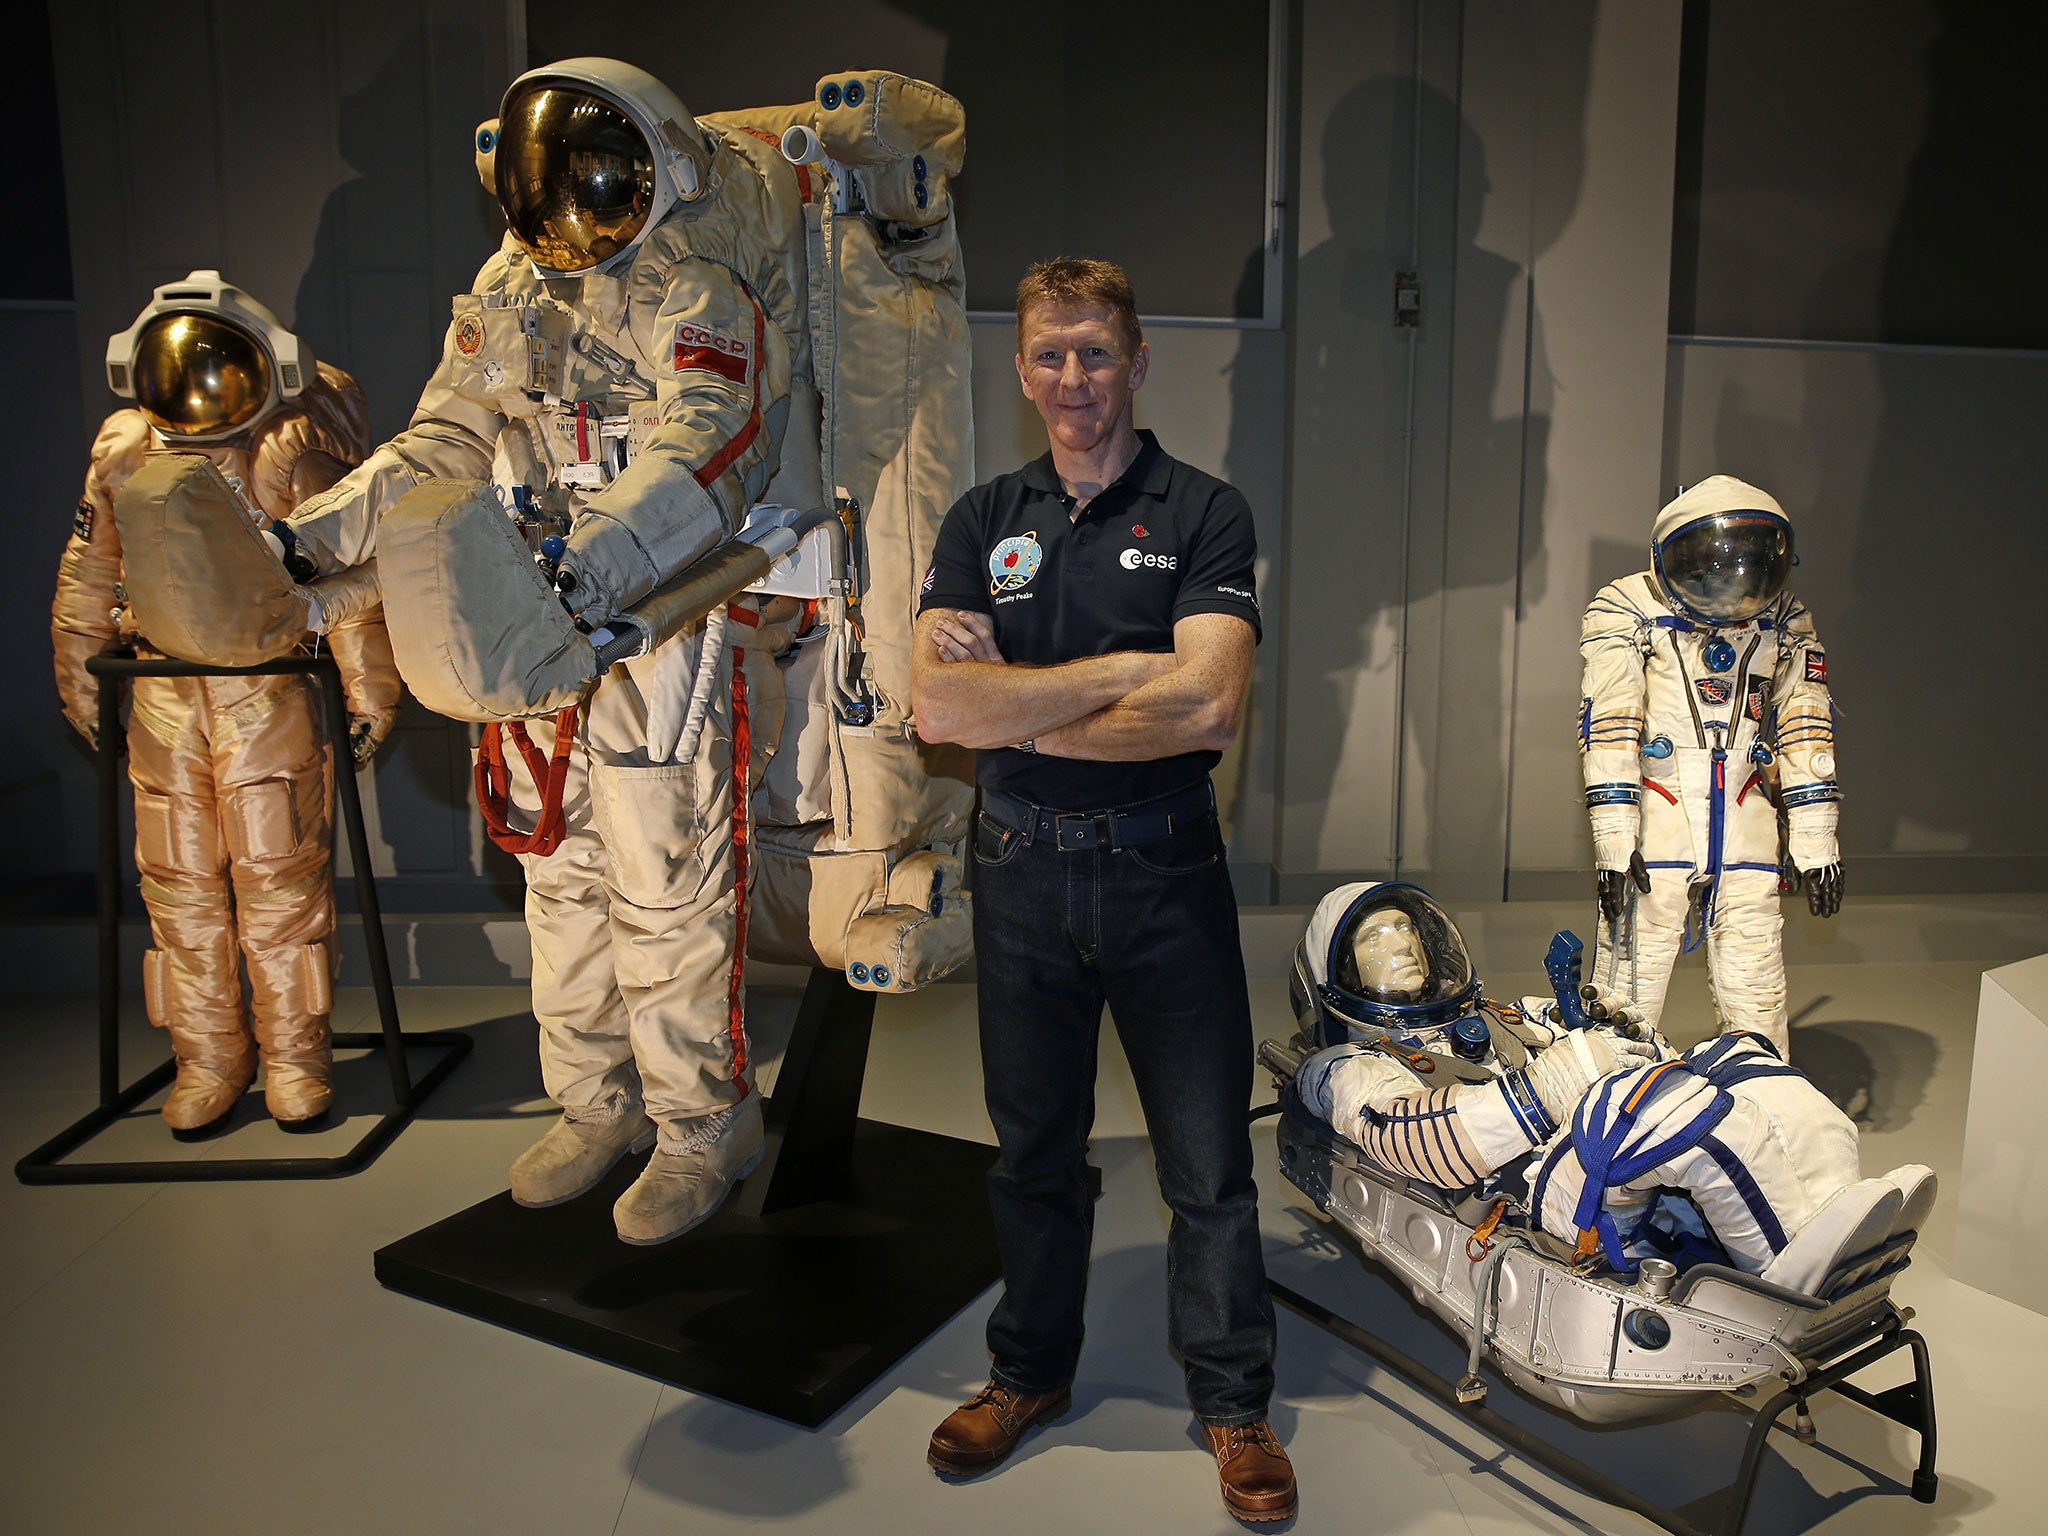 British astronaut Tim Peake looks stands among old space suits on display at the Science Museum in London on 6 November, 2015